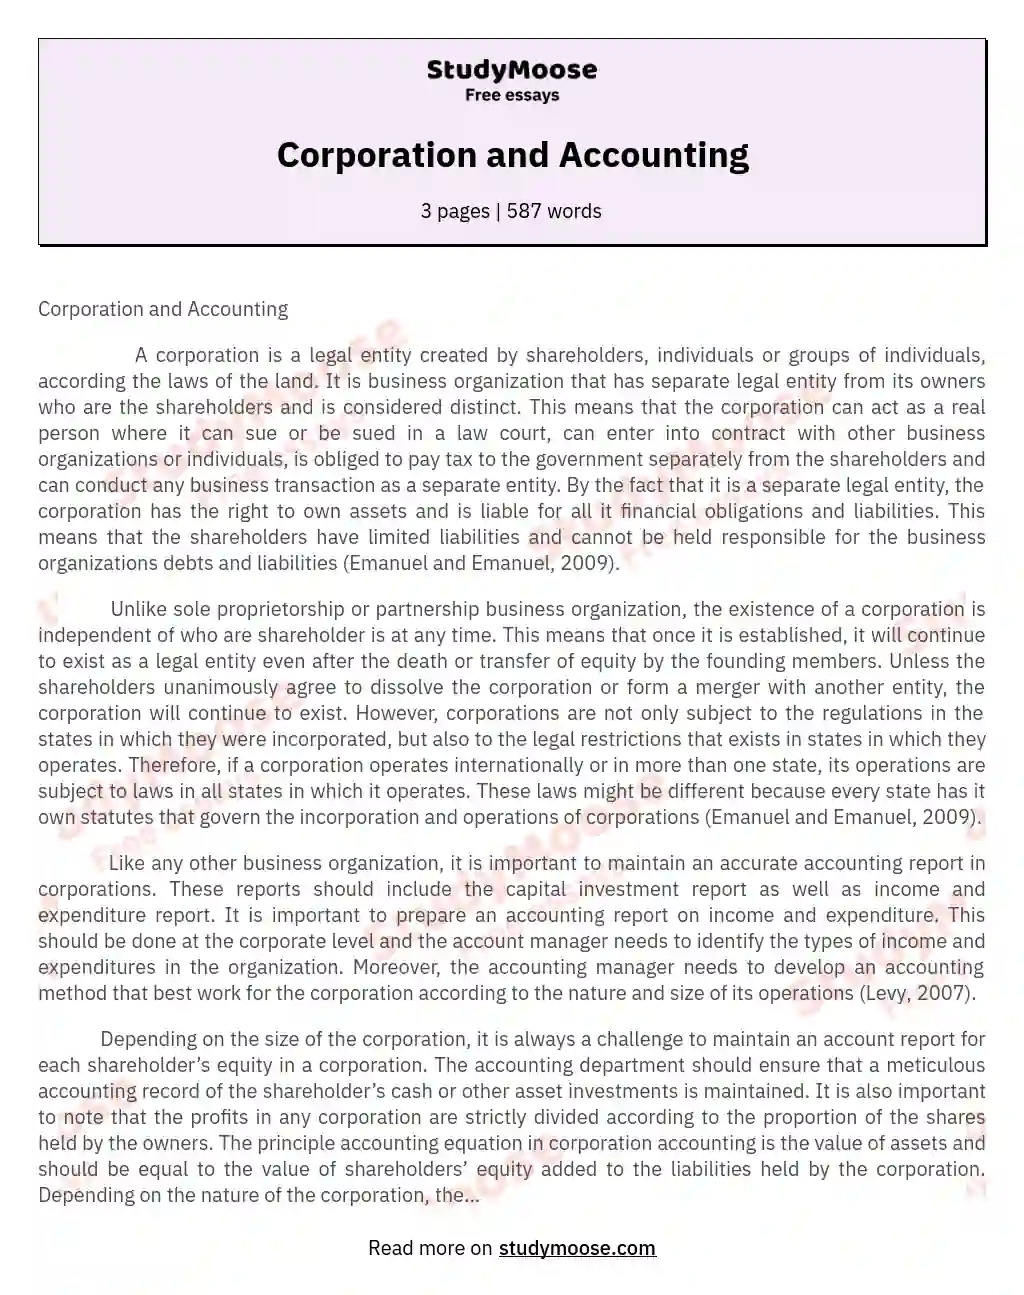 Corporation and Accounting essay